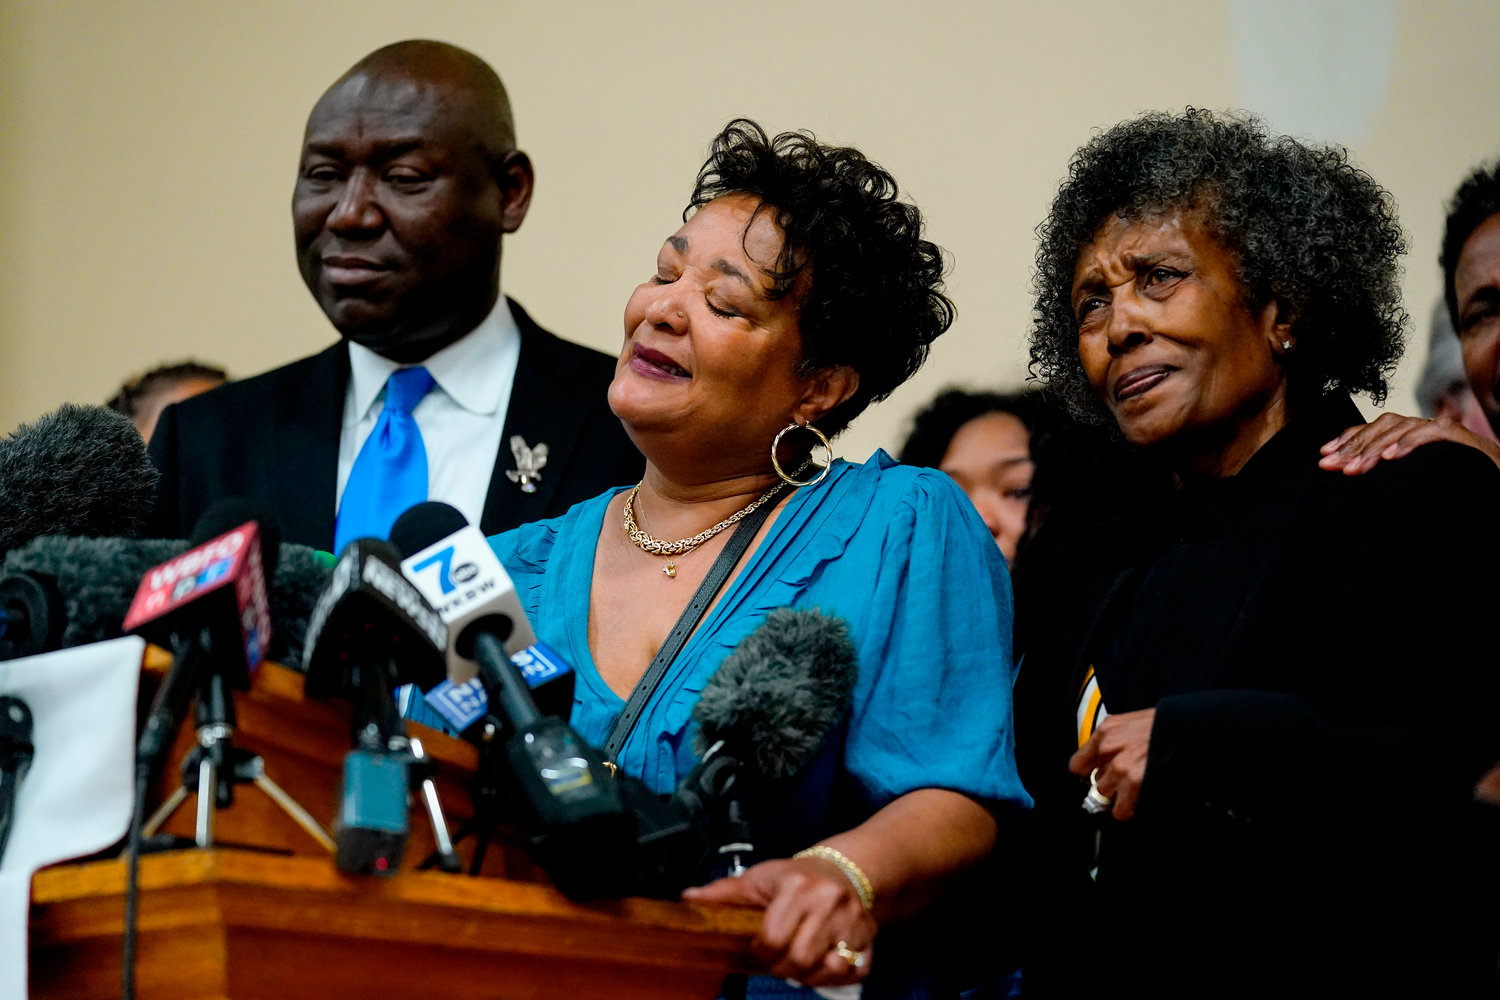 The daughters of Ruth Whitfield, a victim of shooting at a supermarket, Angela Crawley, center, and Robin Harris, accompanied by attorney Benjamin Crump, speak with members of the media during a news conference in Buffalo, N.Y., Monday, May 16, 2022. (AP Photo/Matt Rourke)